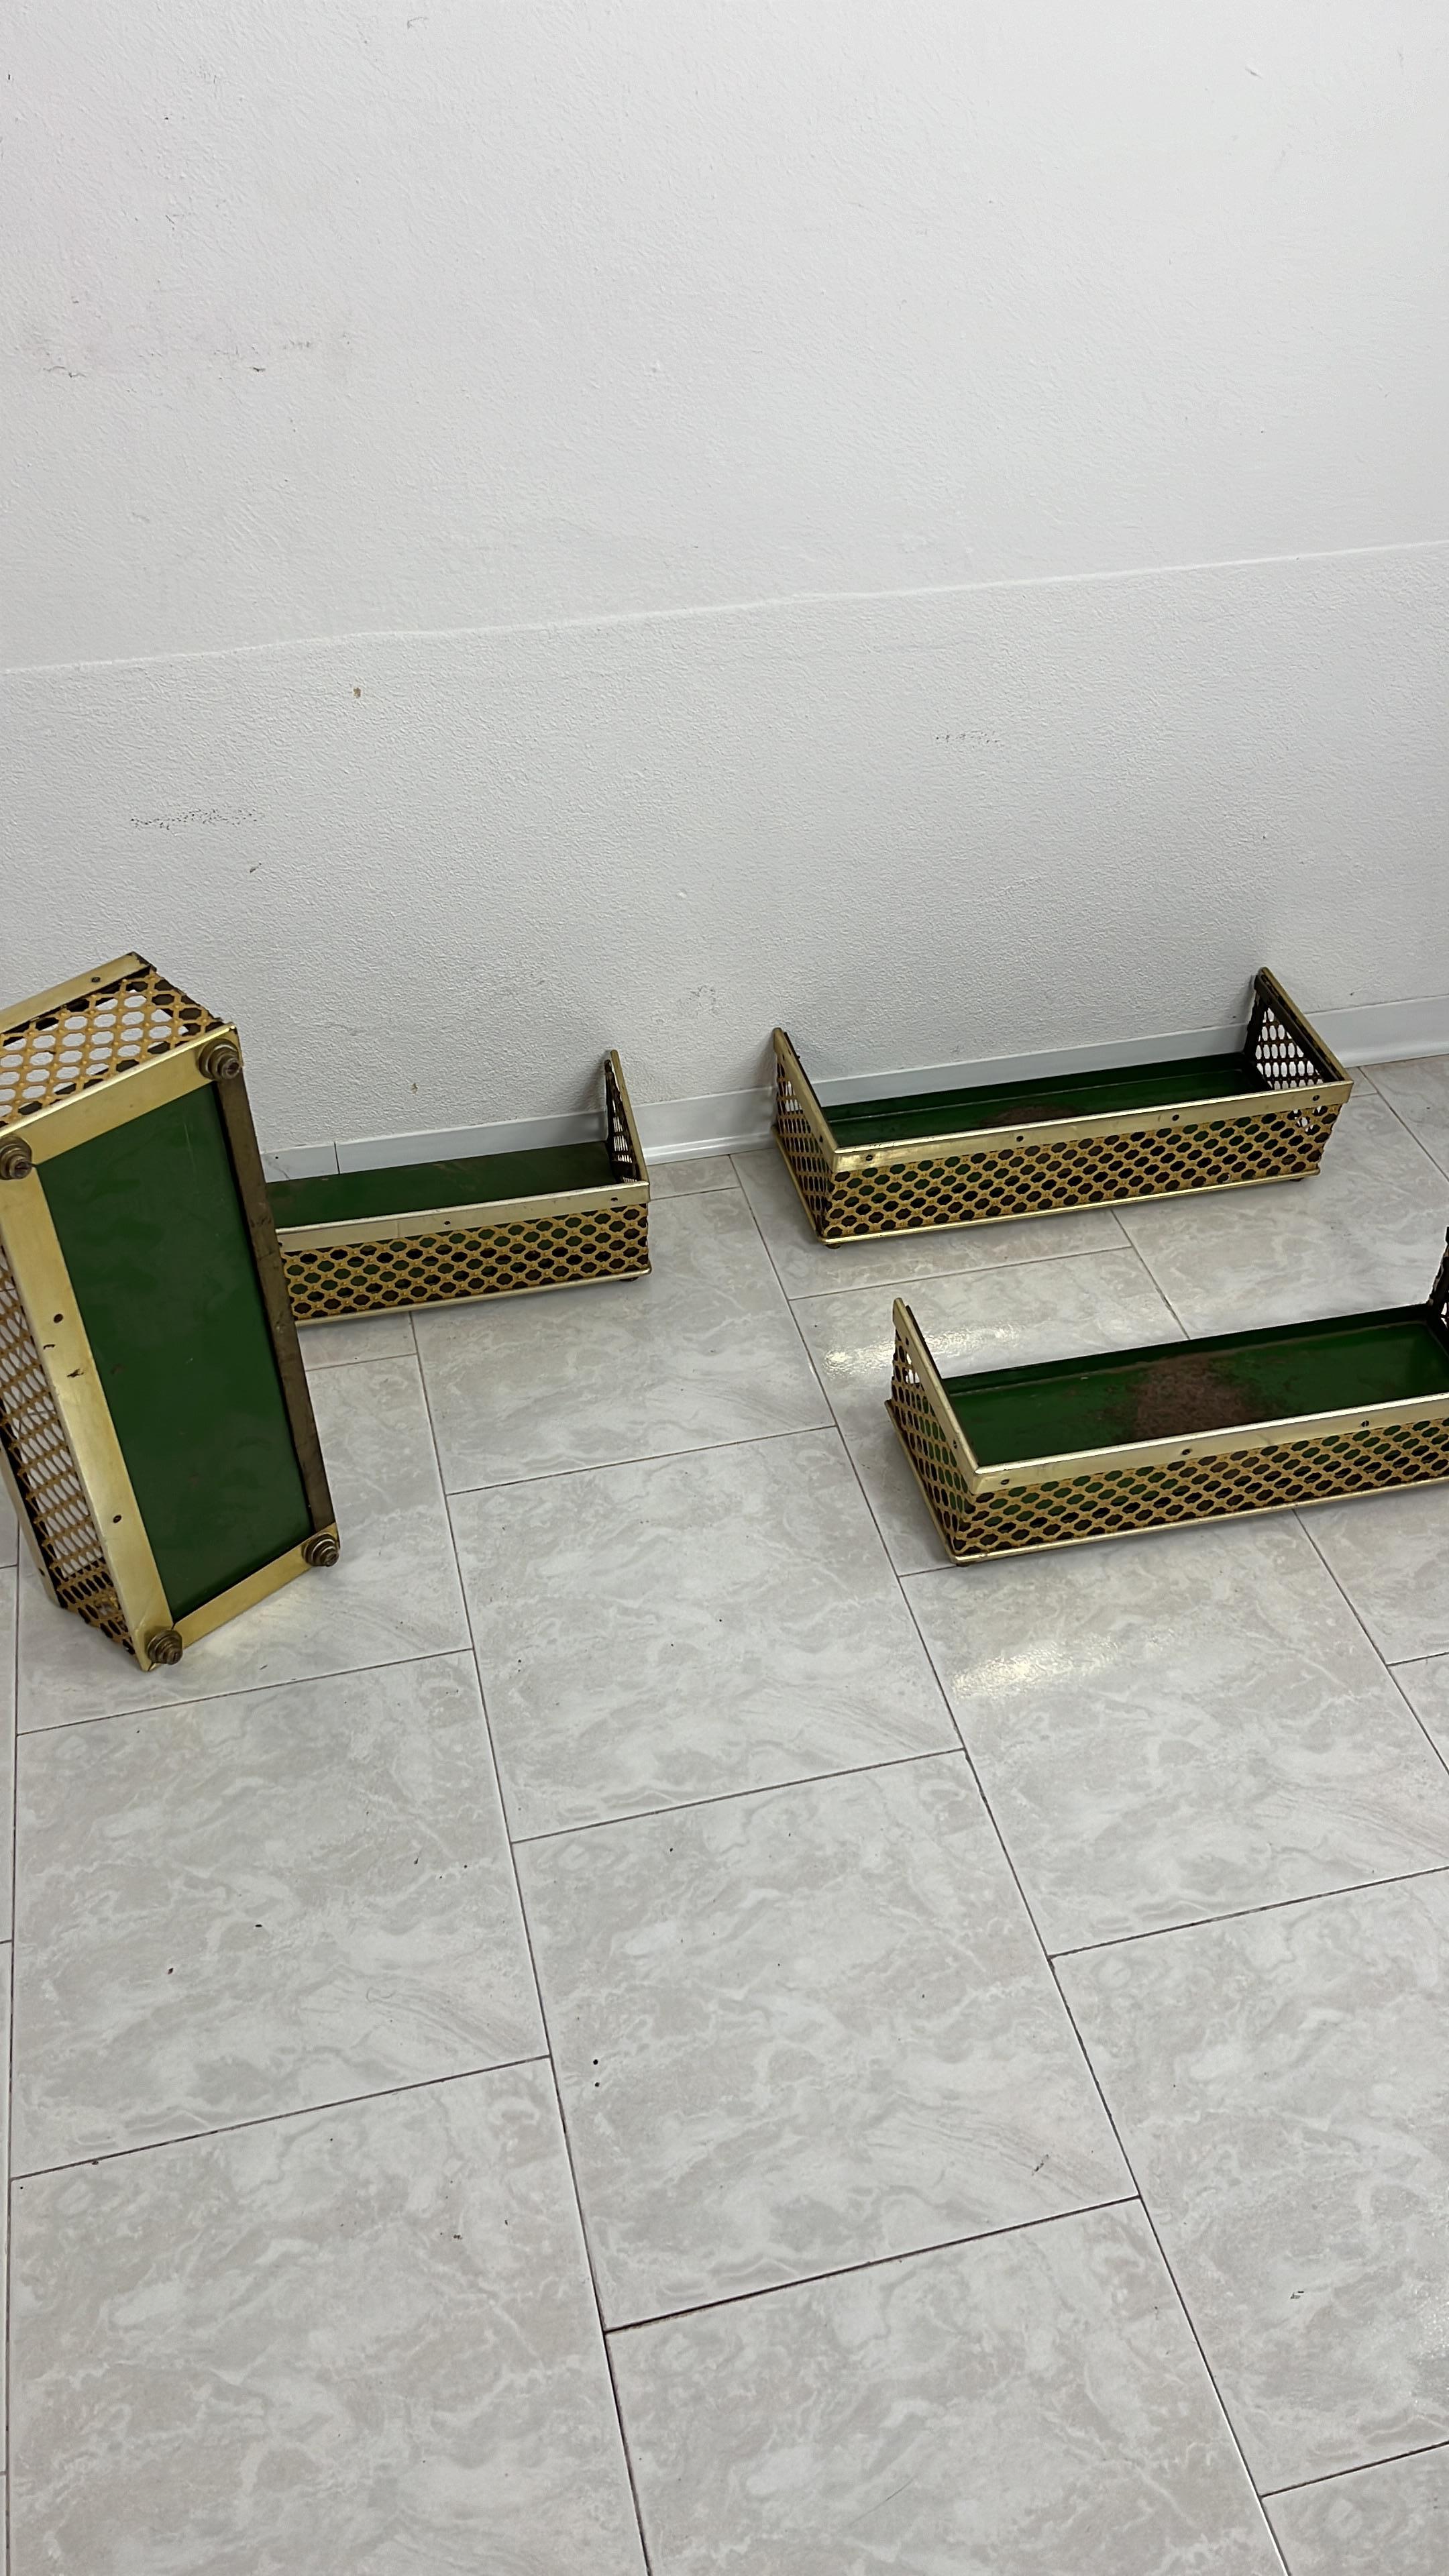 Set of 4 Mid-Century Brass-Covered Planters Attributed to Gio Ponti 1950s For Sale 2